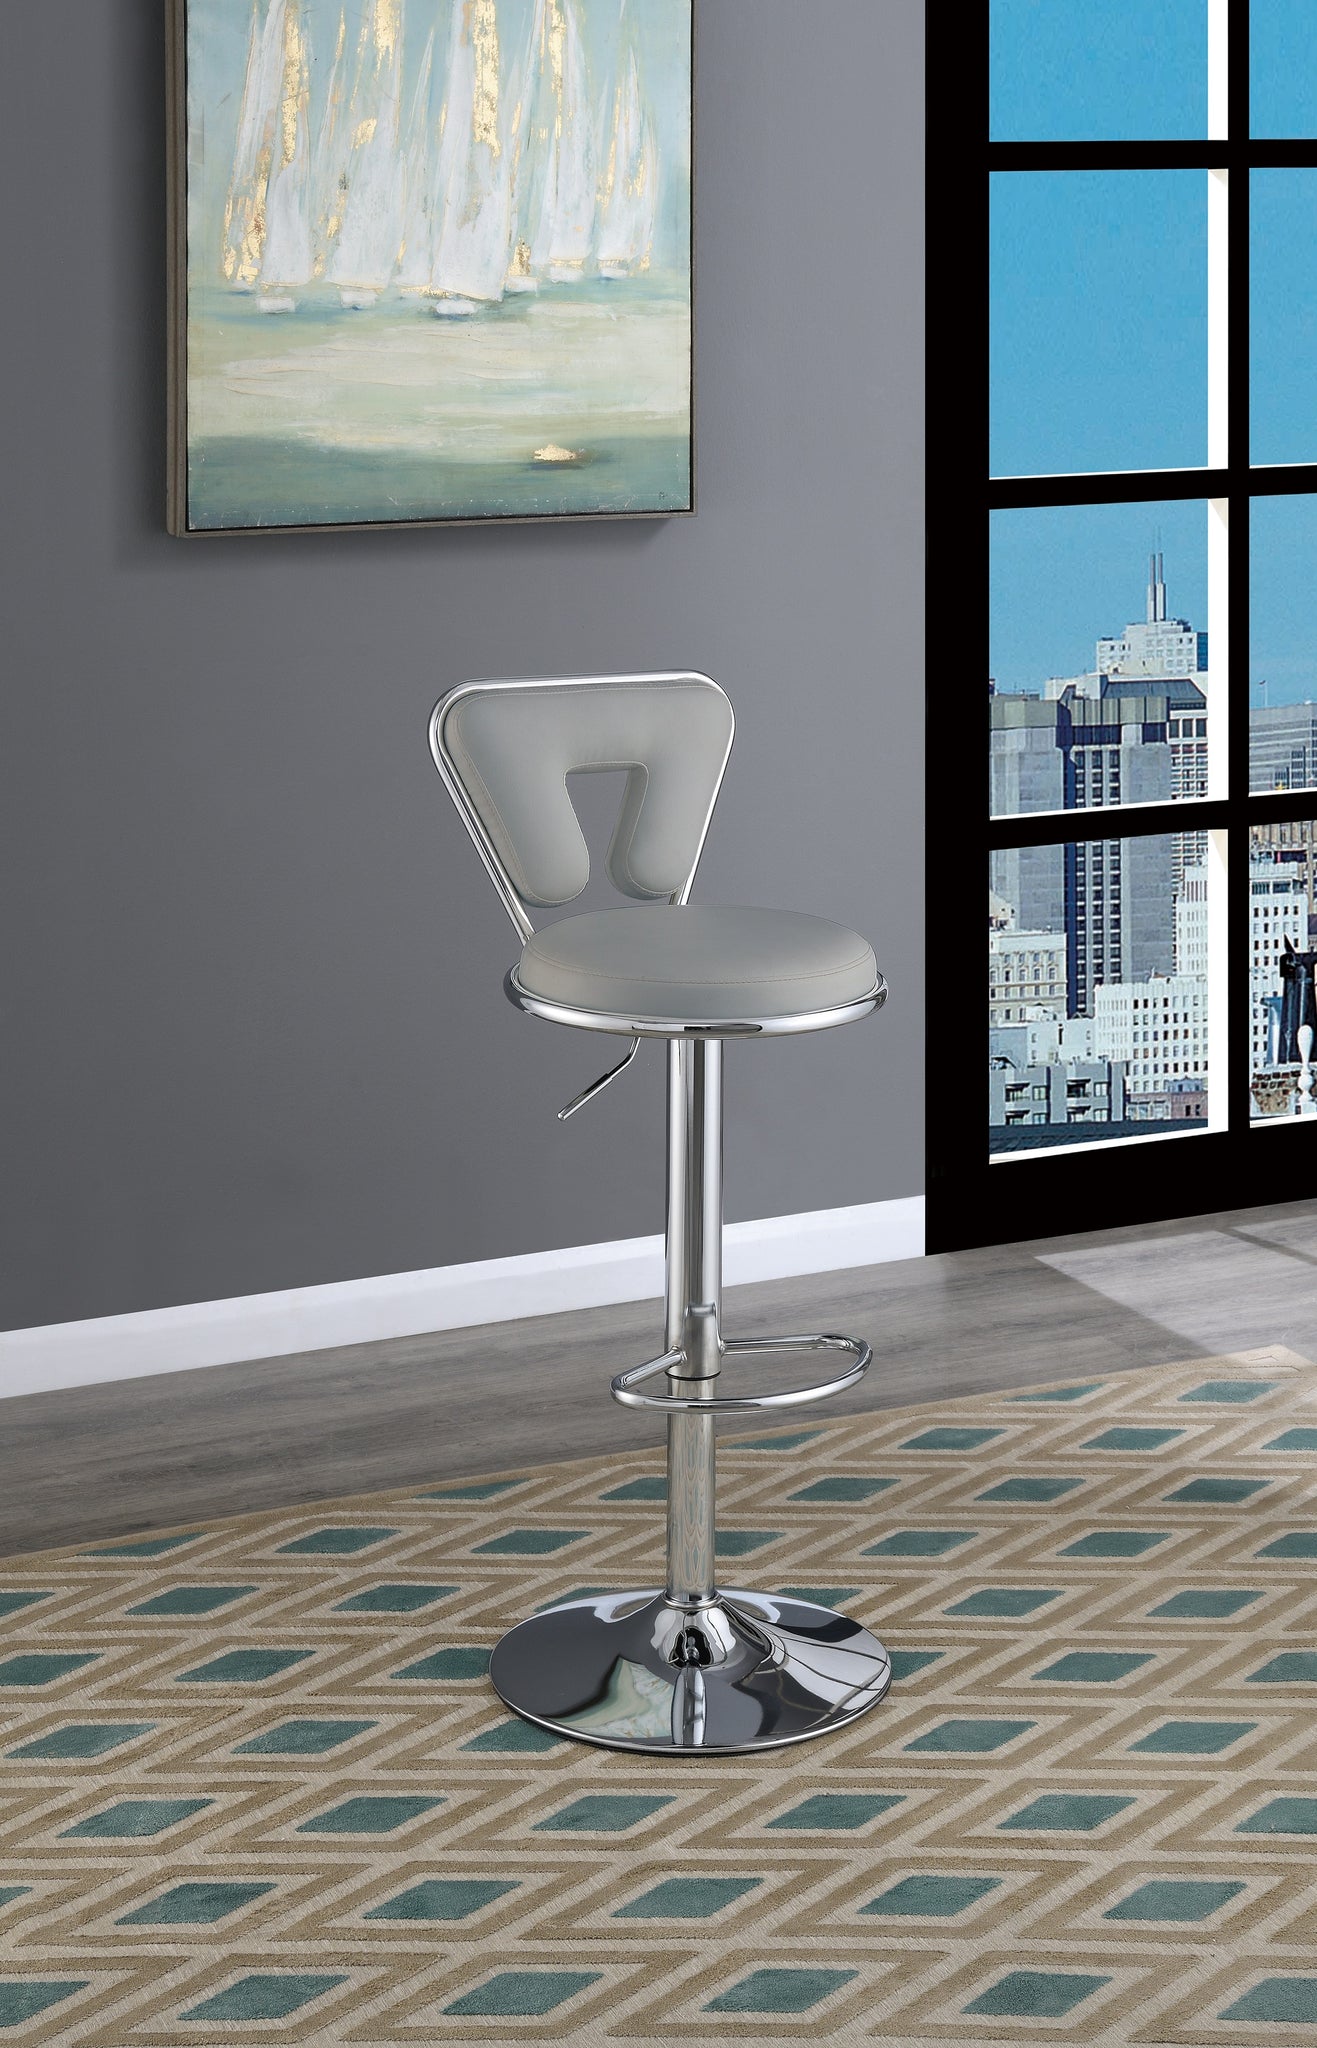 Adjustable Bar stool Gas lift Chair Gray Faux Leather gray-dining room-contemporary-modern-bar